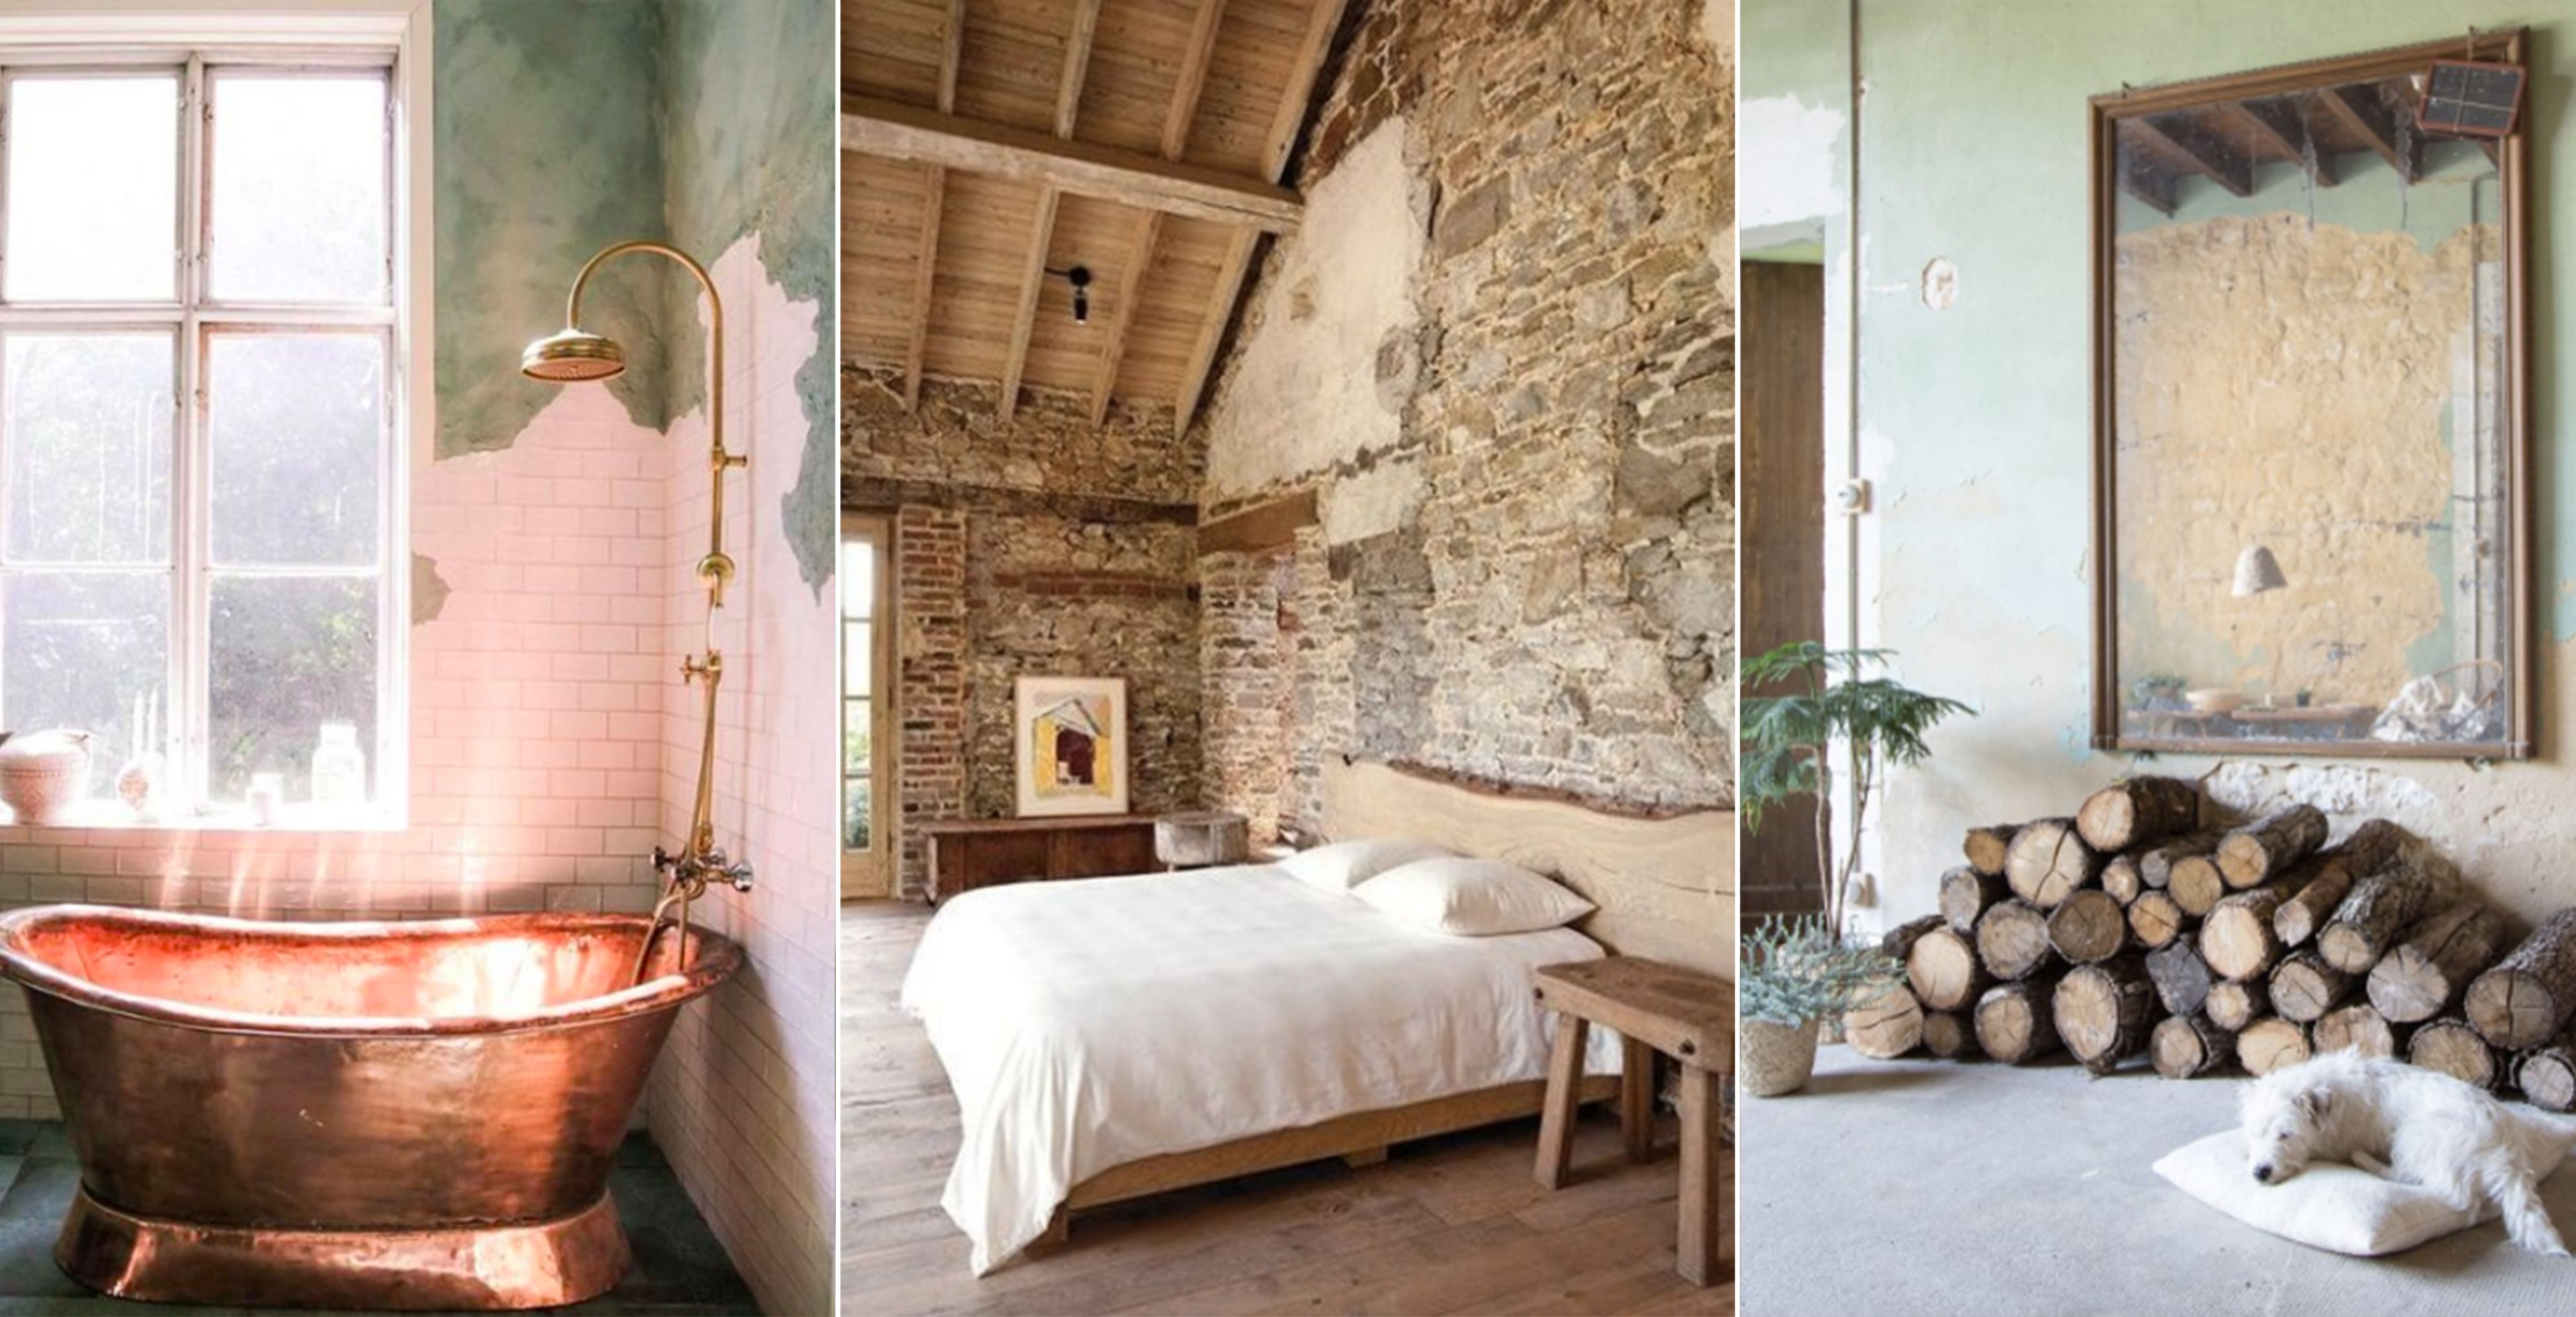 17 Rooms With Rustic Unfinished Walls This Raw Wall Trend Just